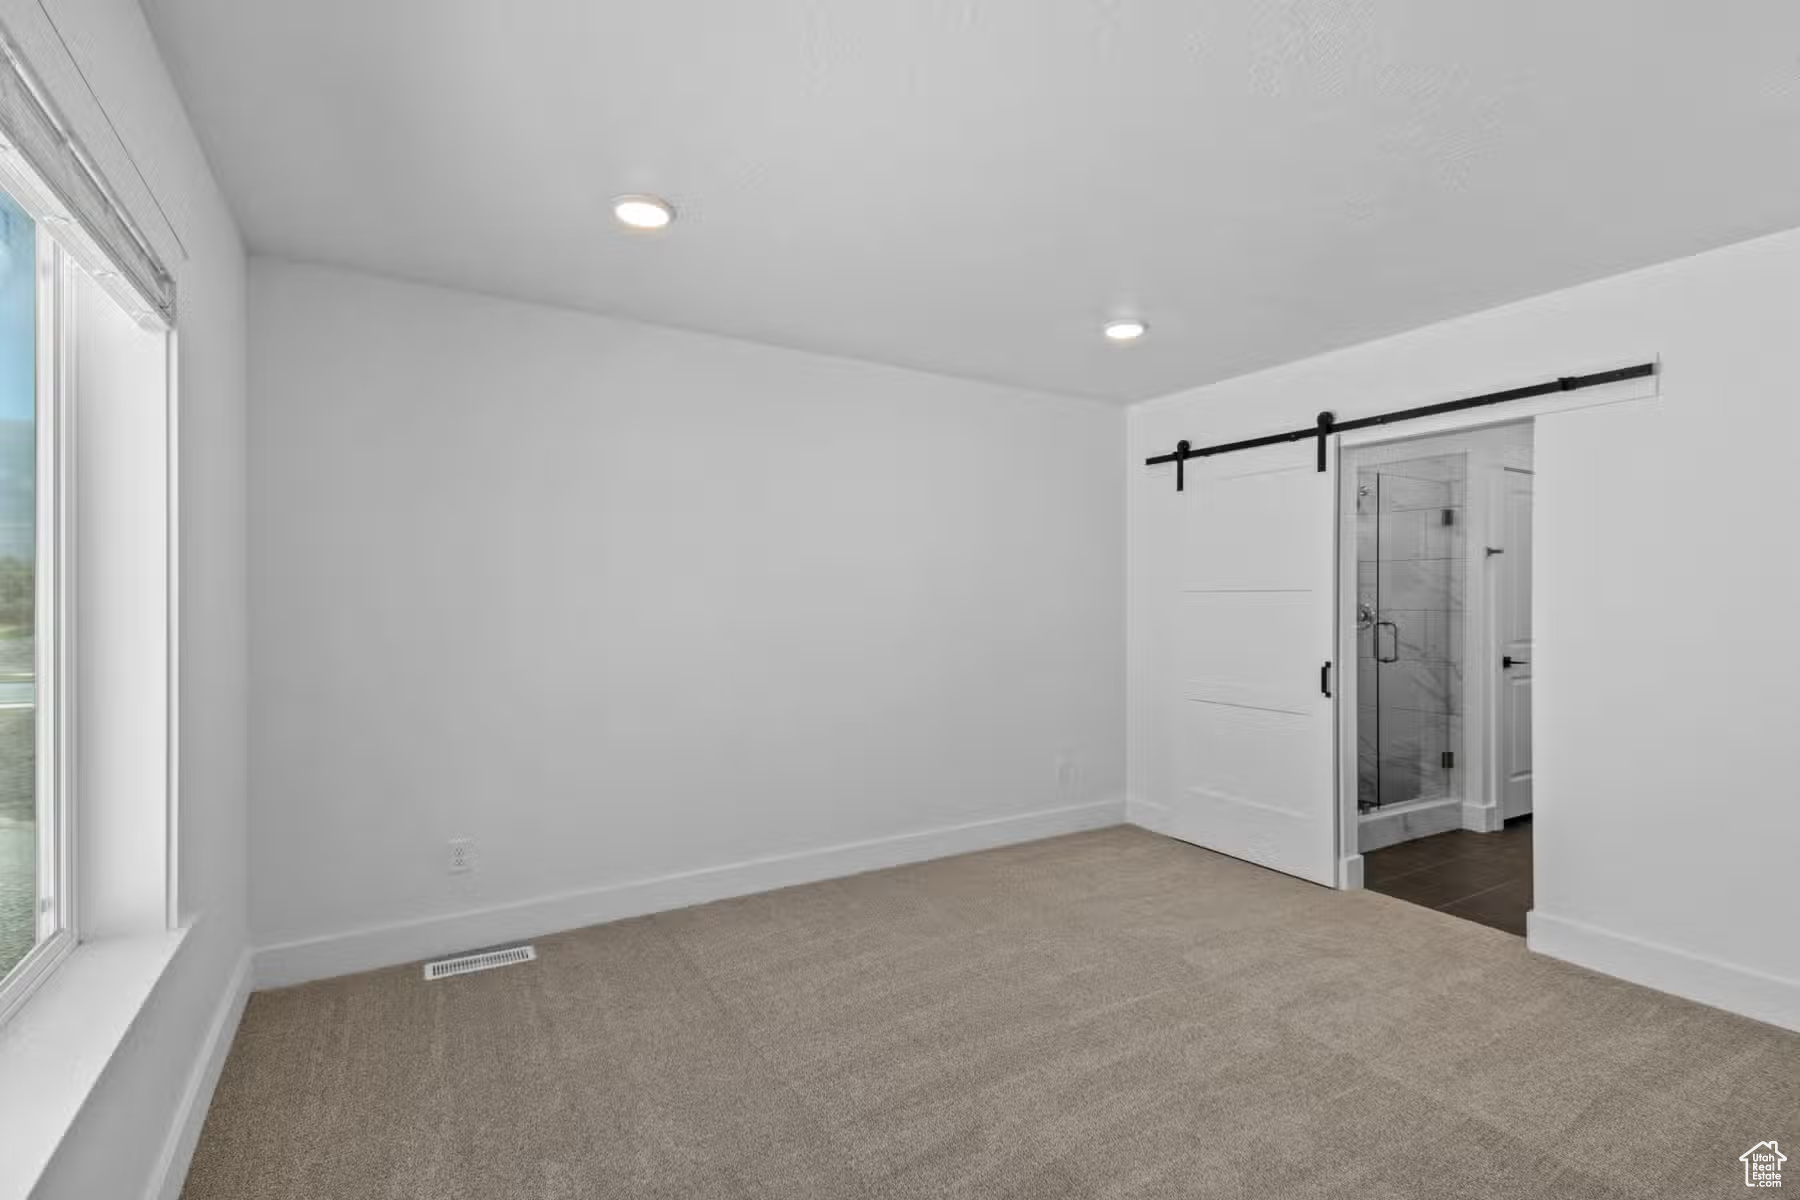 Unfurnished bedroom with dark colored carpet, ensuite bathroom, and a barn door